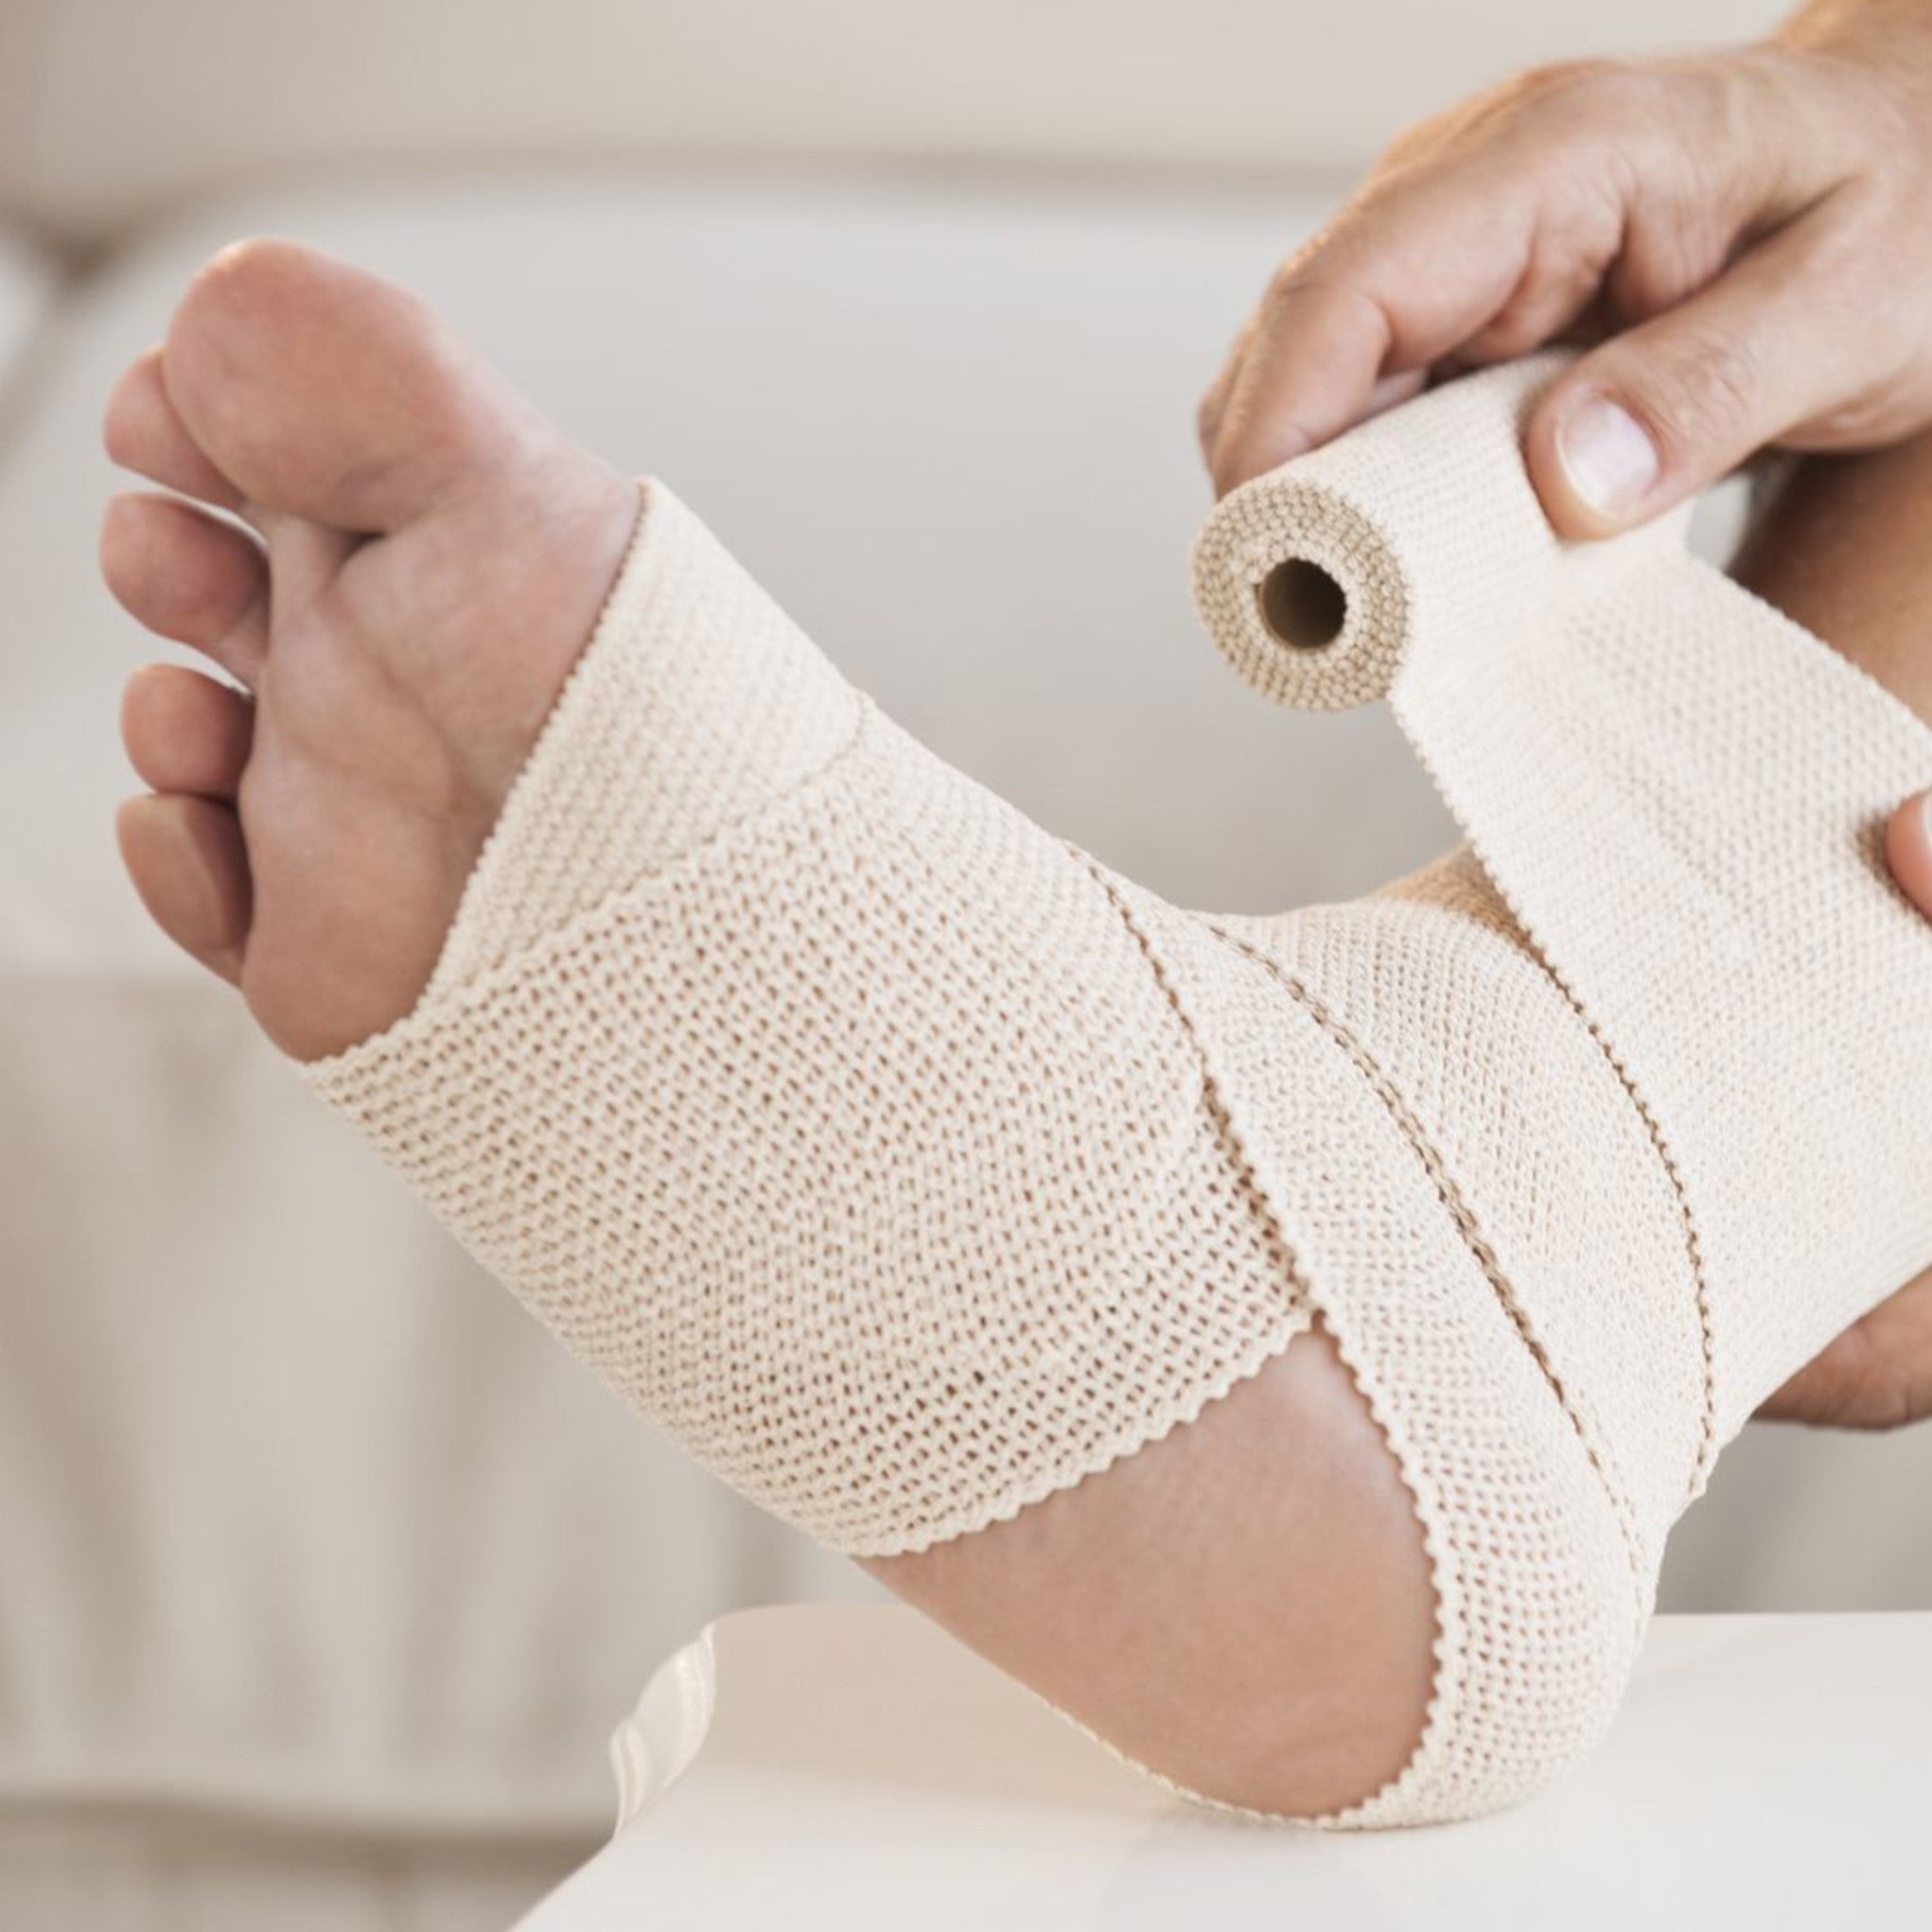 Treatments for Sprained Ankles